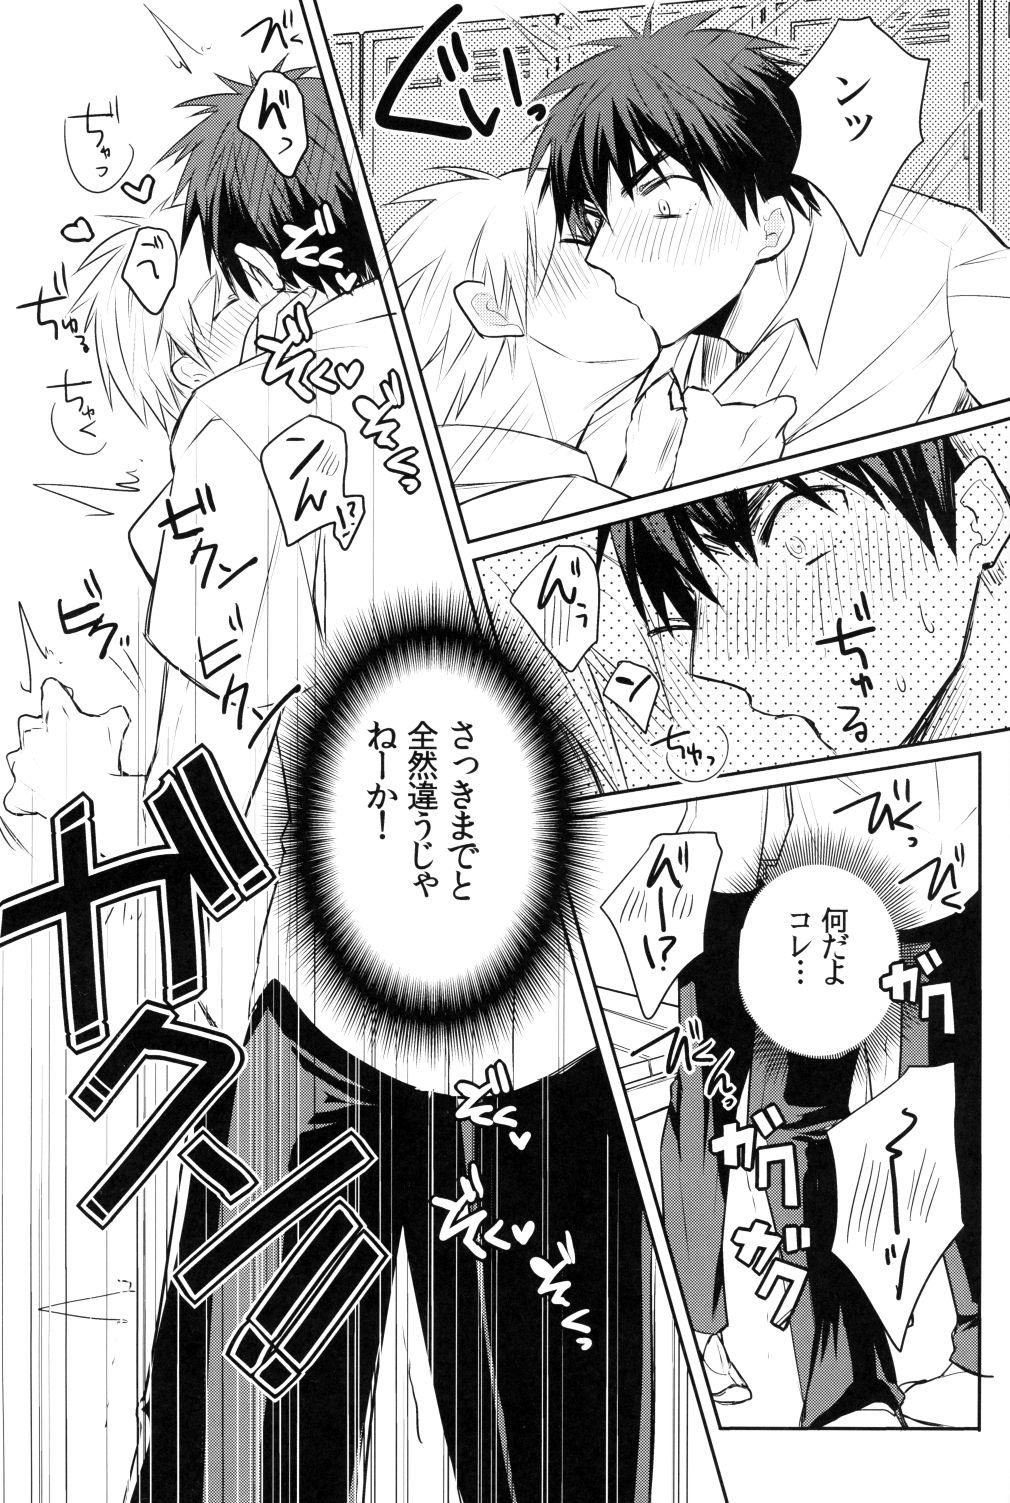 Kagami-kun's Thing is Amazing!! 15